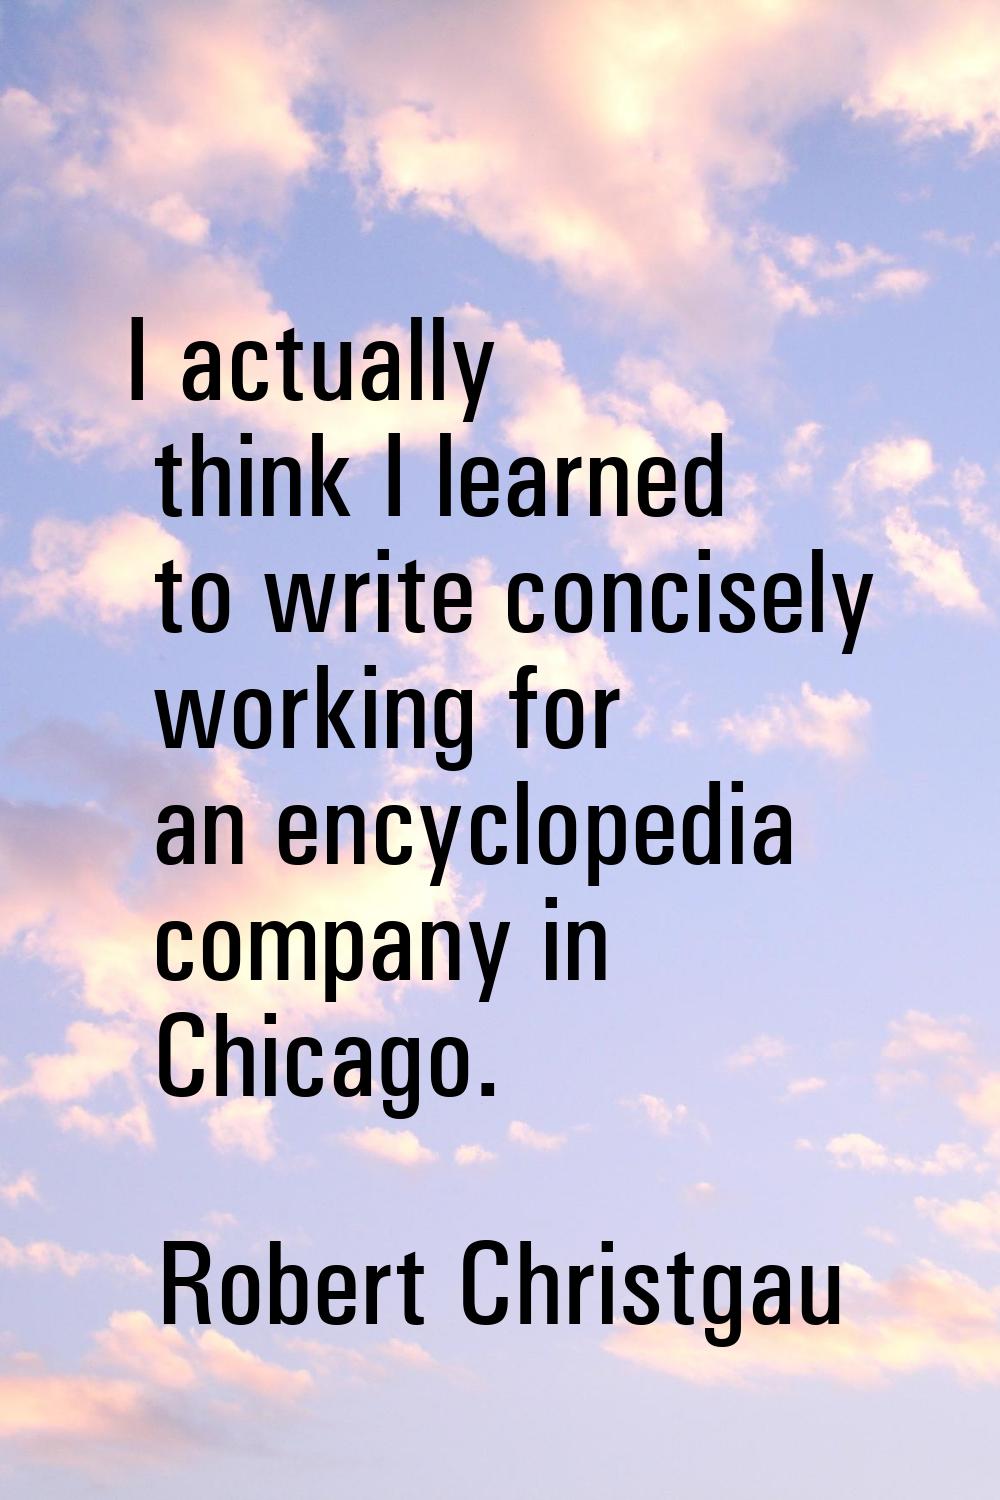 I actually think I learned to write concisely working for an encyclopedia company in Chicago.